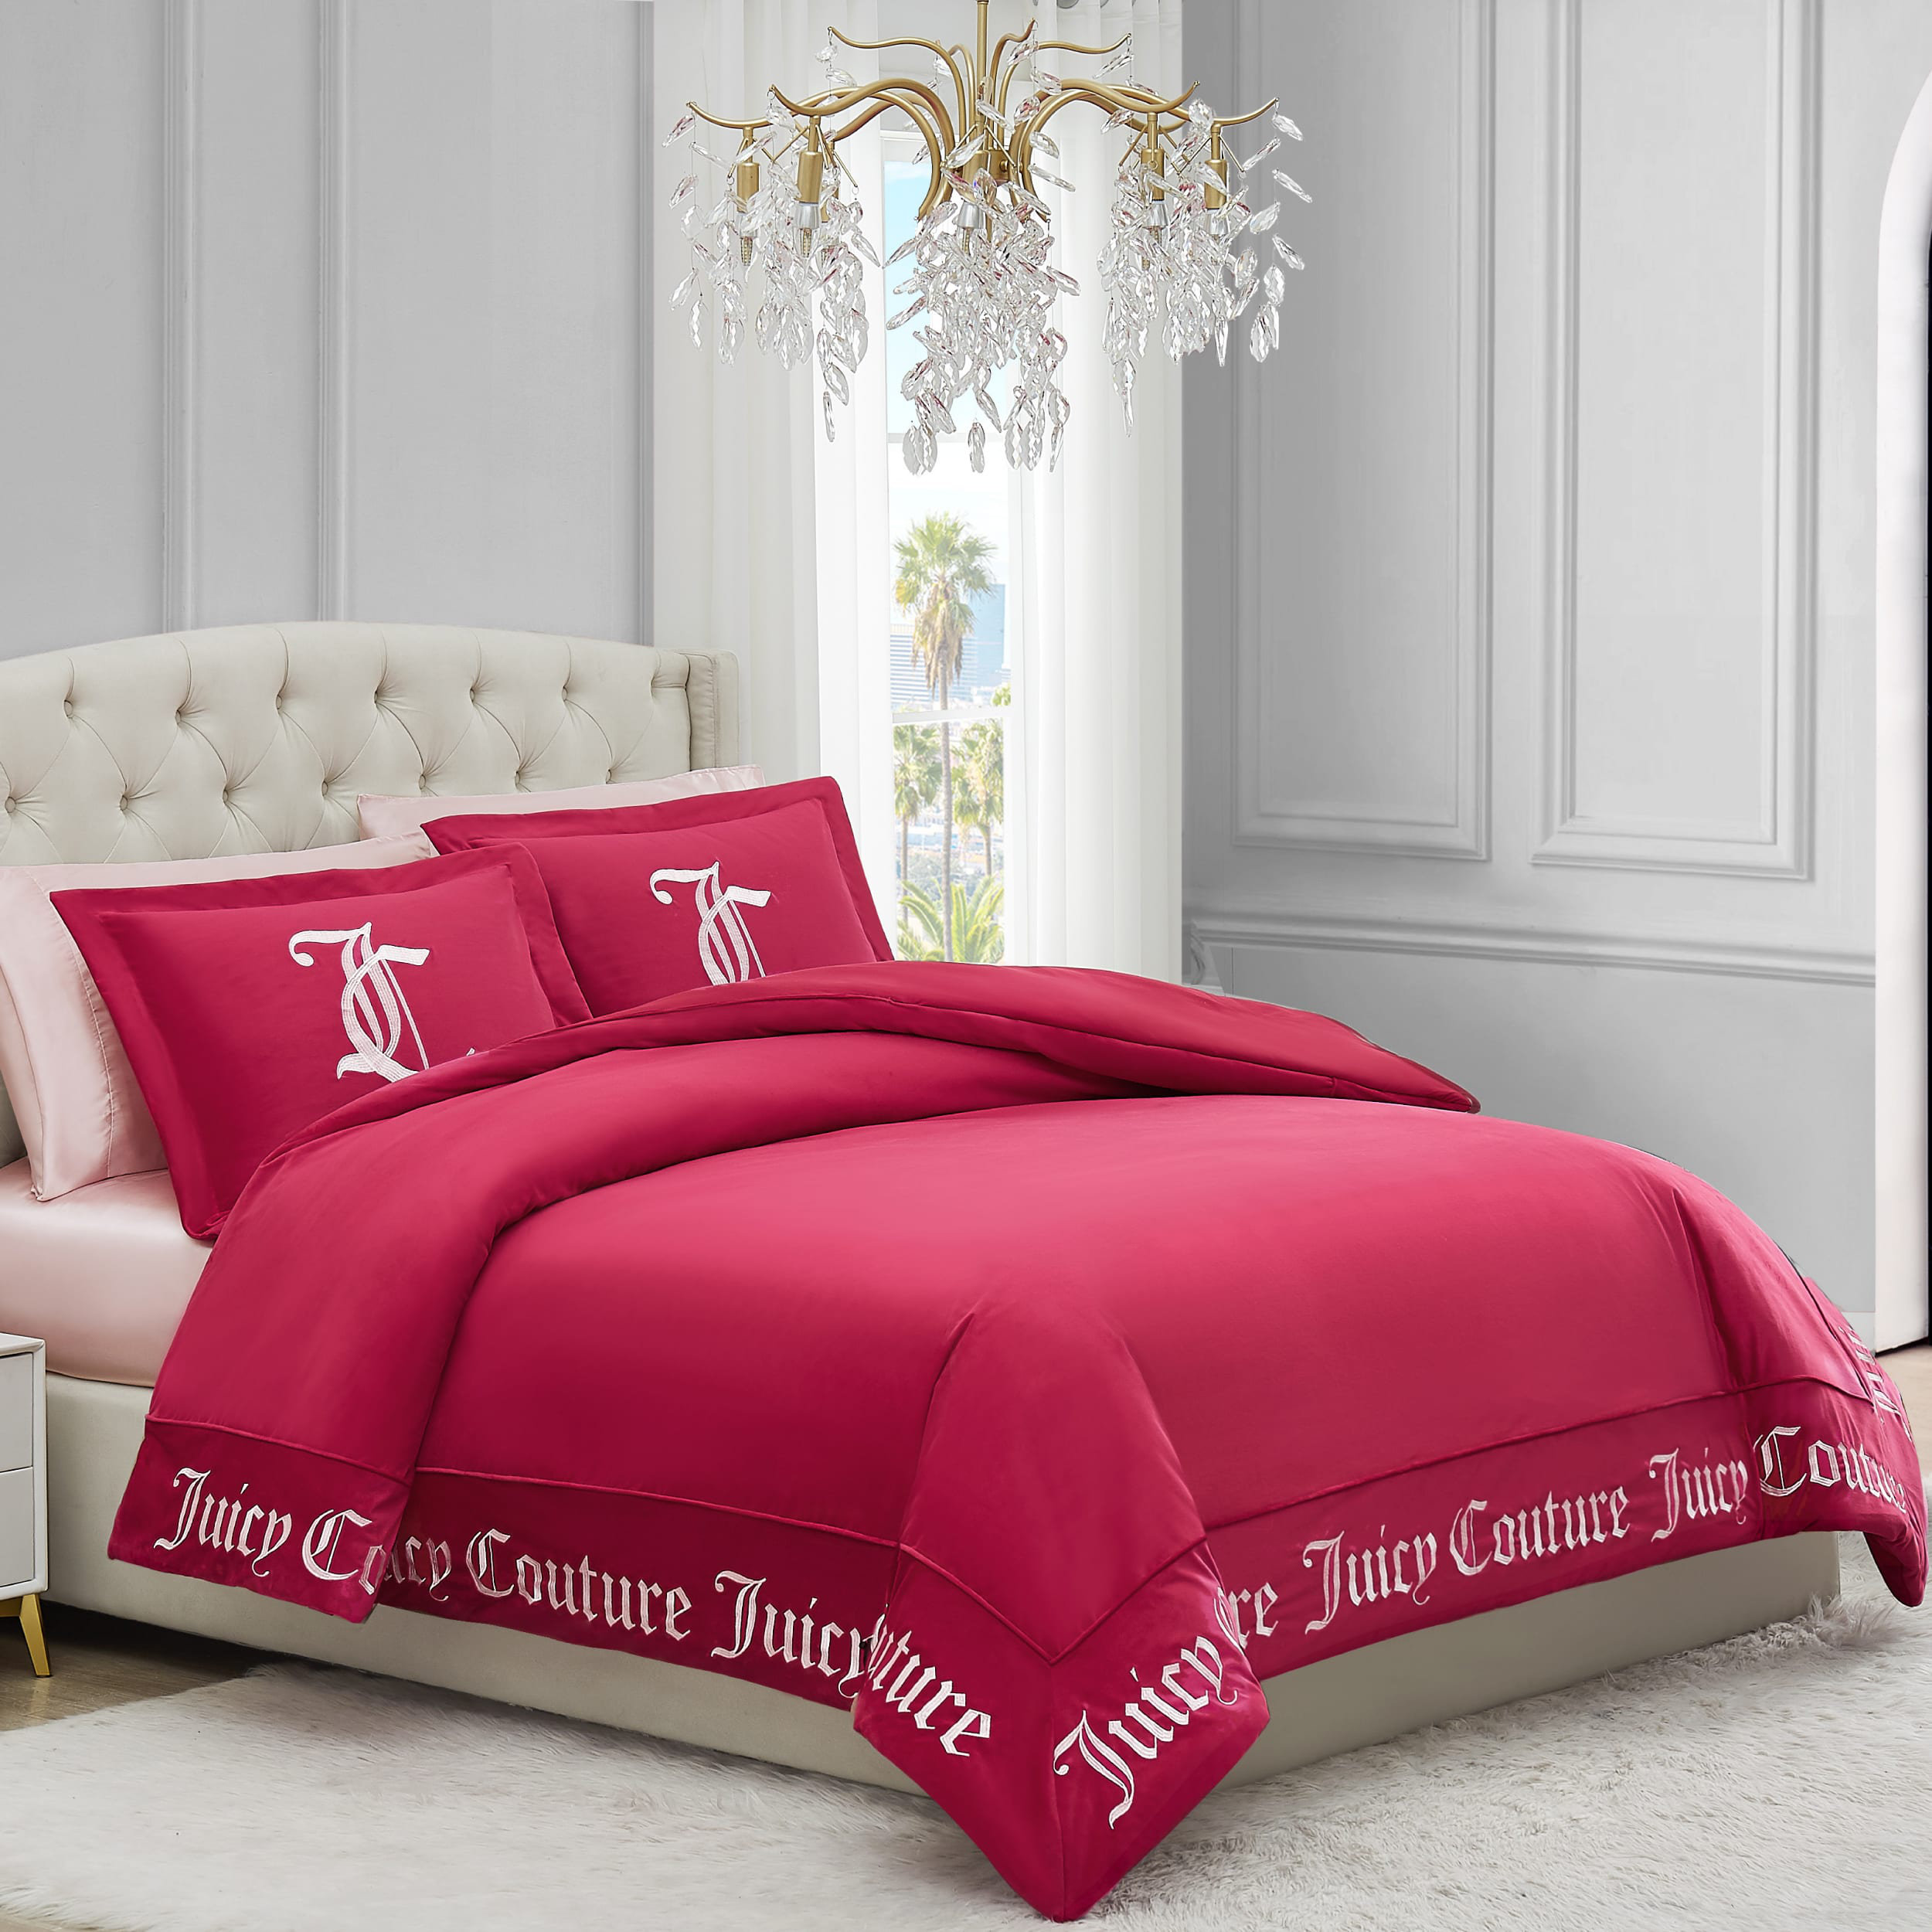 Juicy Couture Silky Satin Sheet Set - Twin - Black